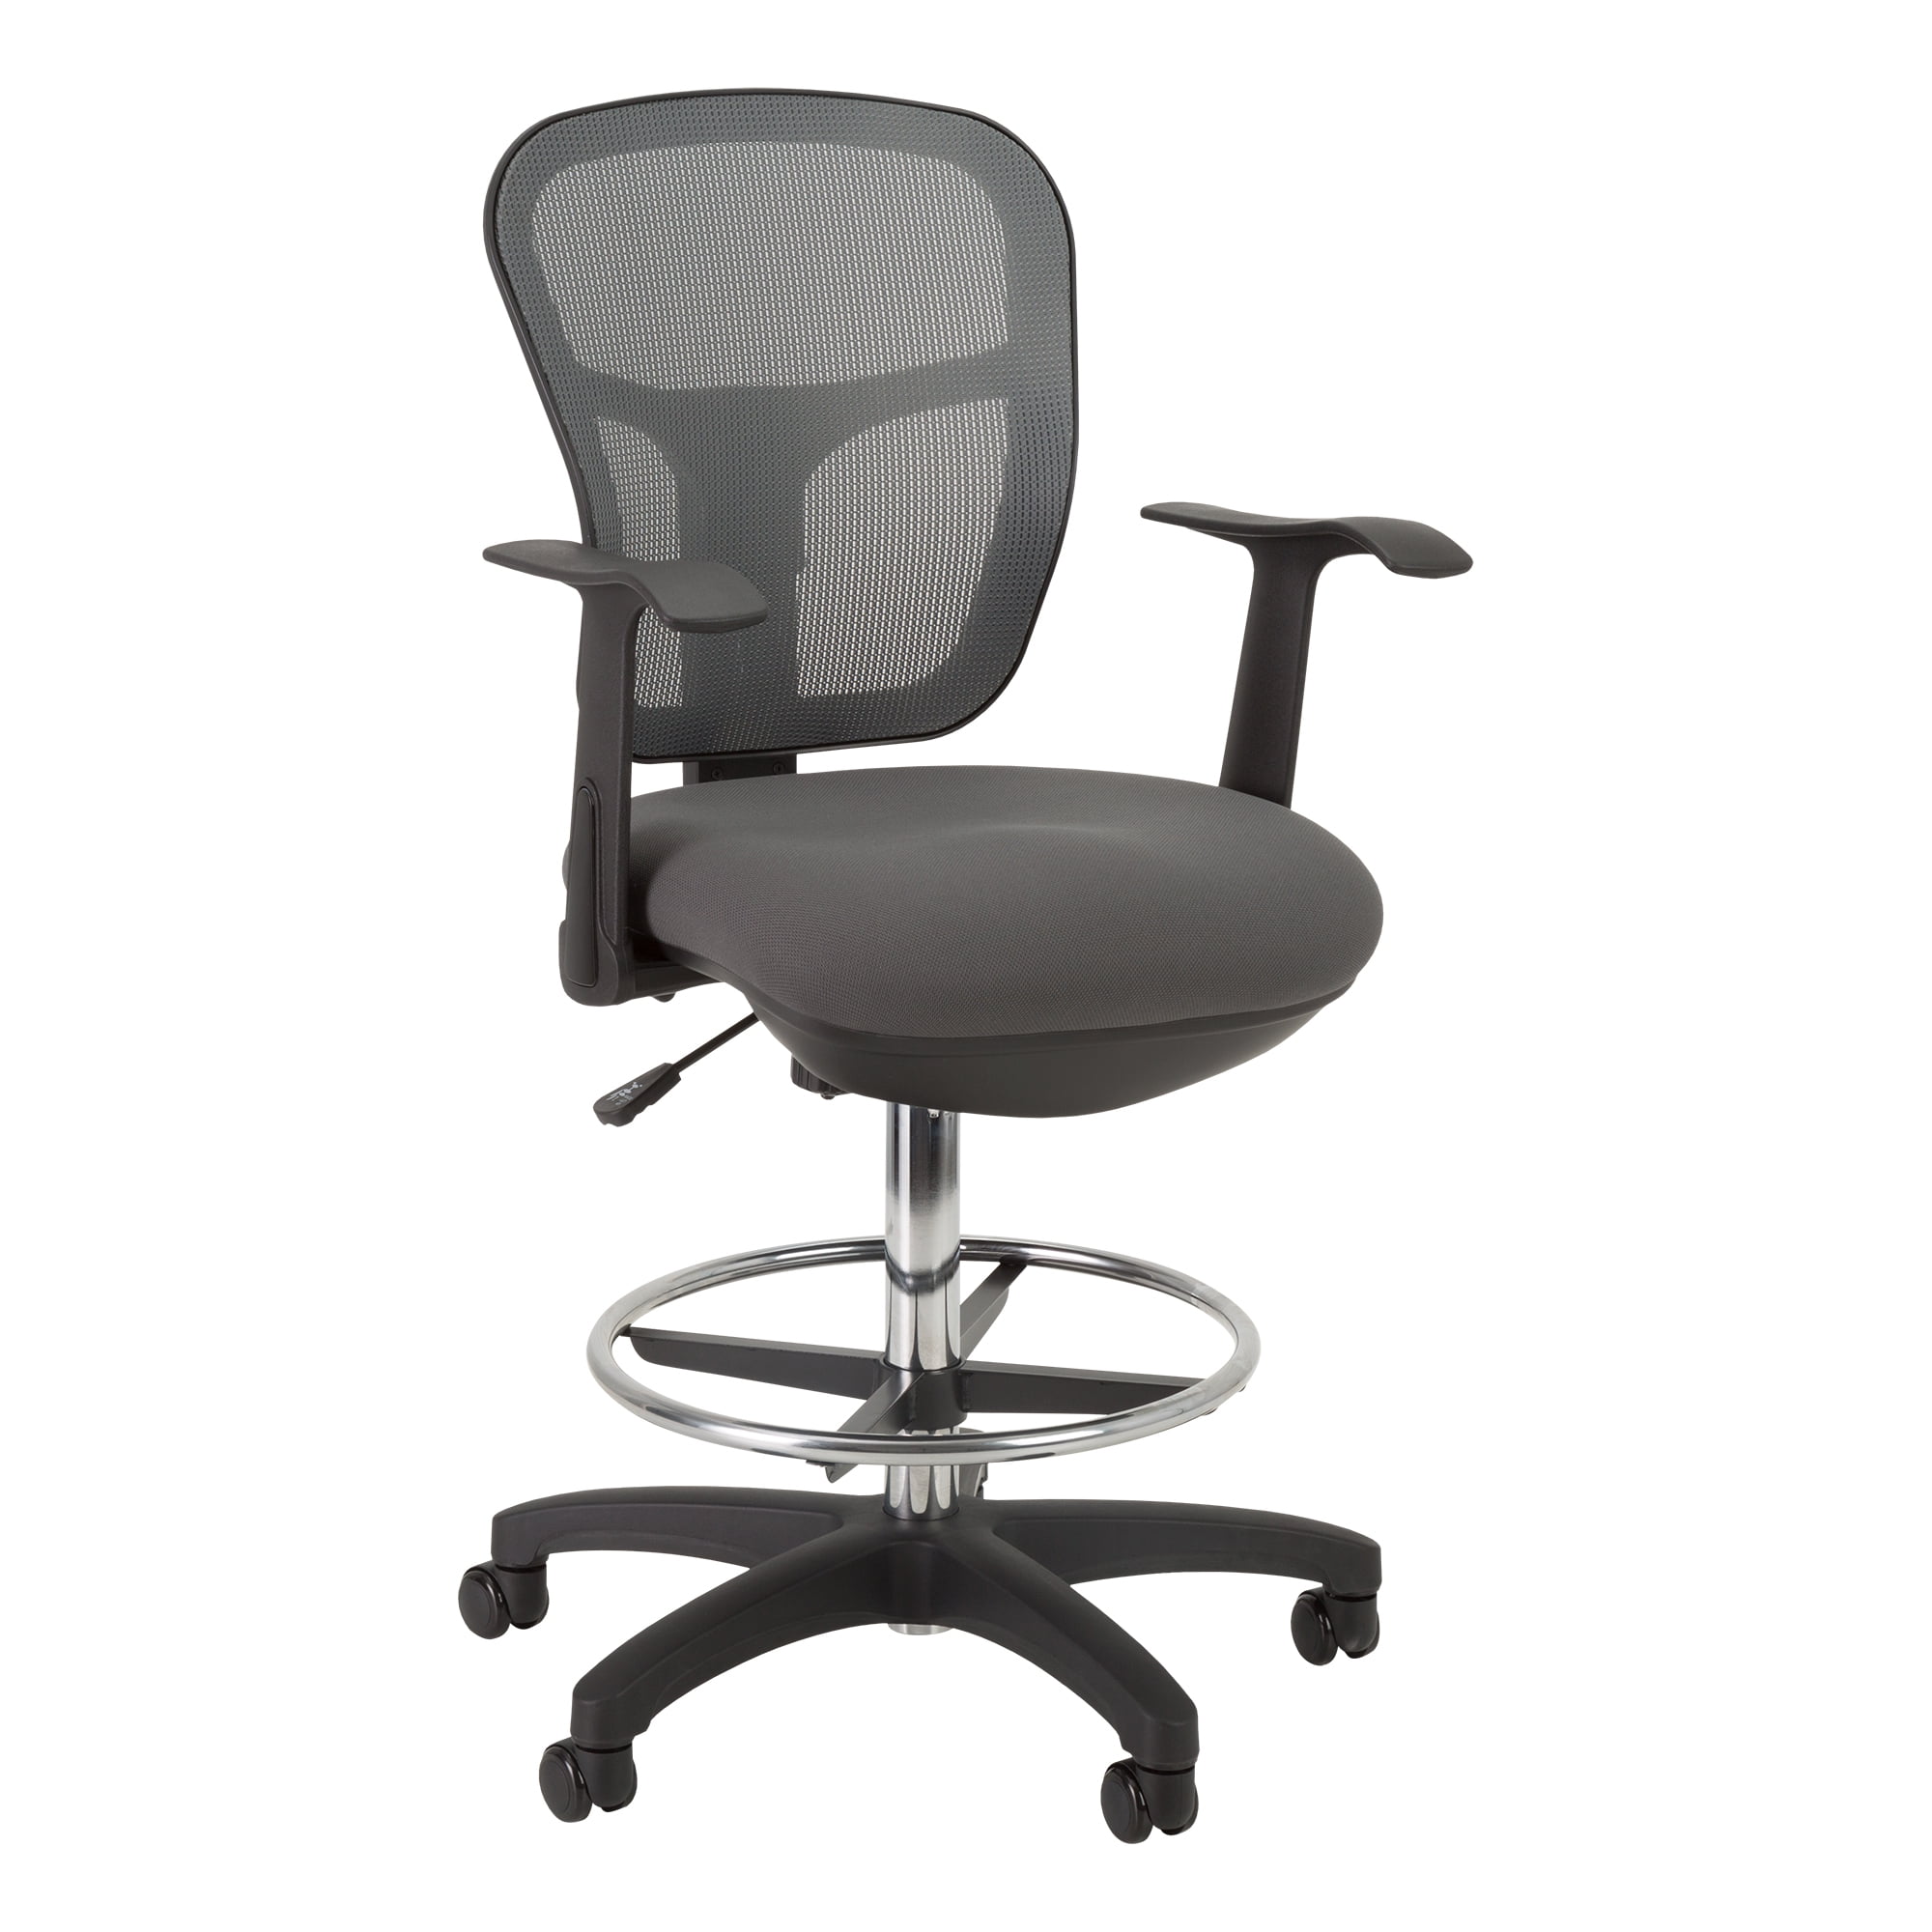 Norwood Commercial Furniture AdjustableHeight Office Mesh Drafting Chair with Chrome Footrest